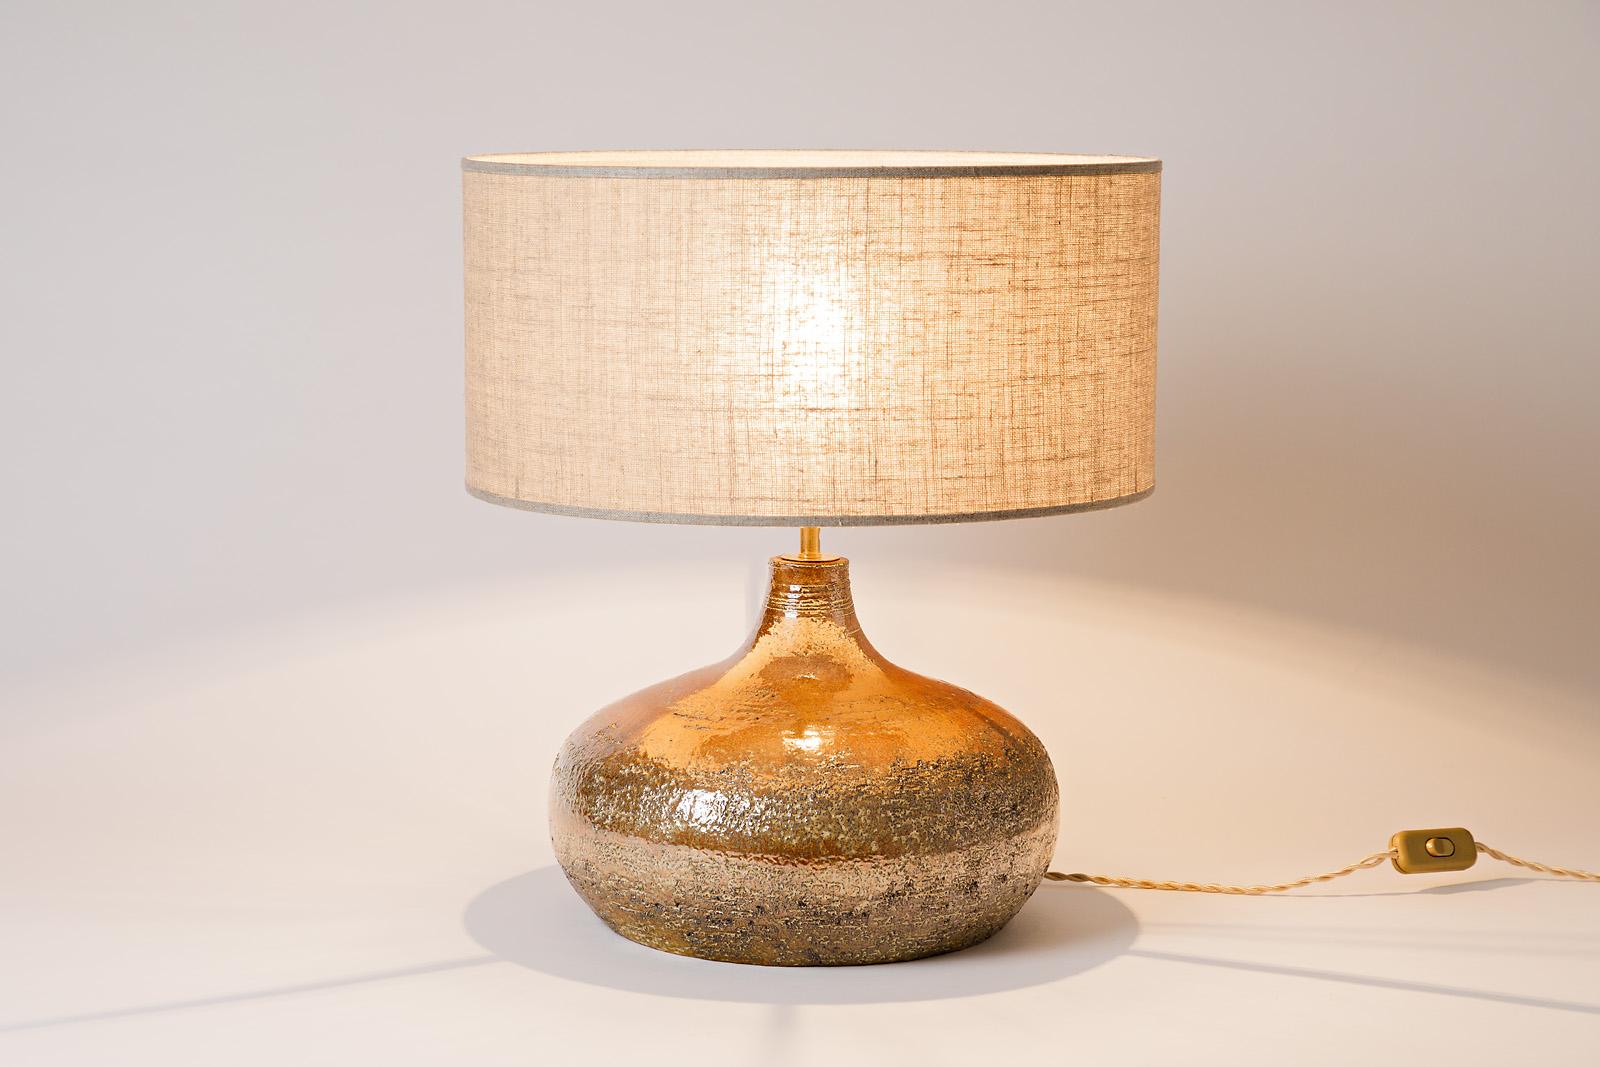 Midcentury Shiny Ceramic Table Lamp by Bessone Vallauris with Gold Glaze Color 1